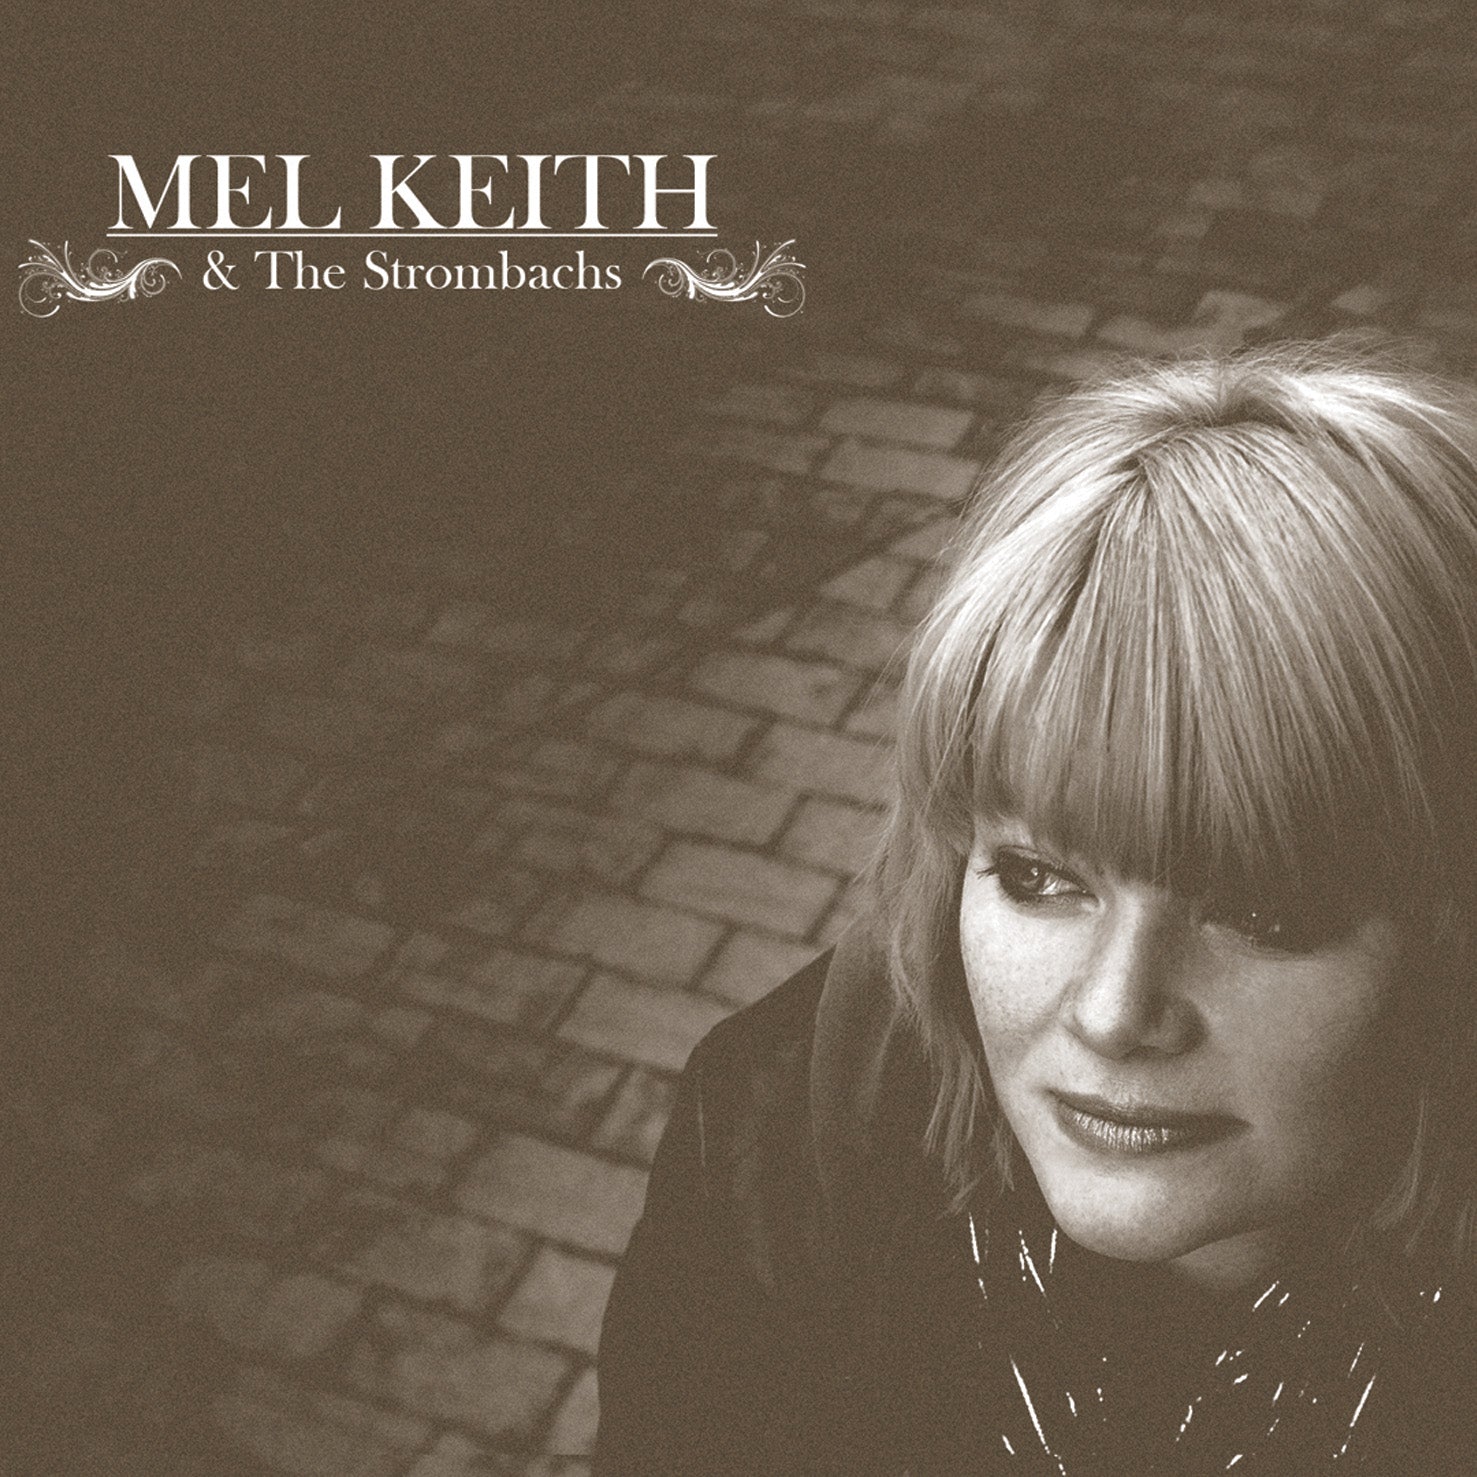 Mel Keith & The Strombachs CD